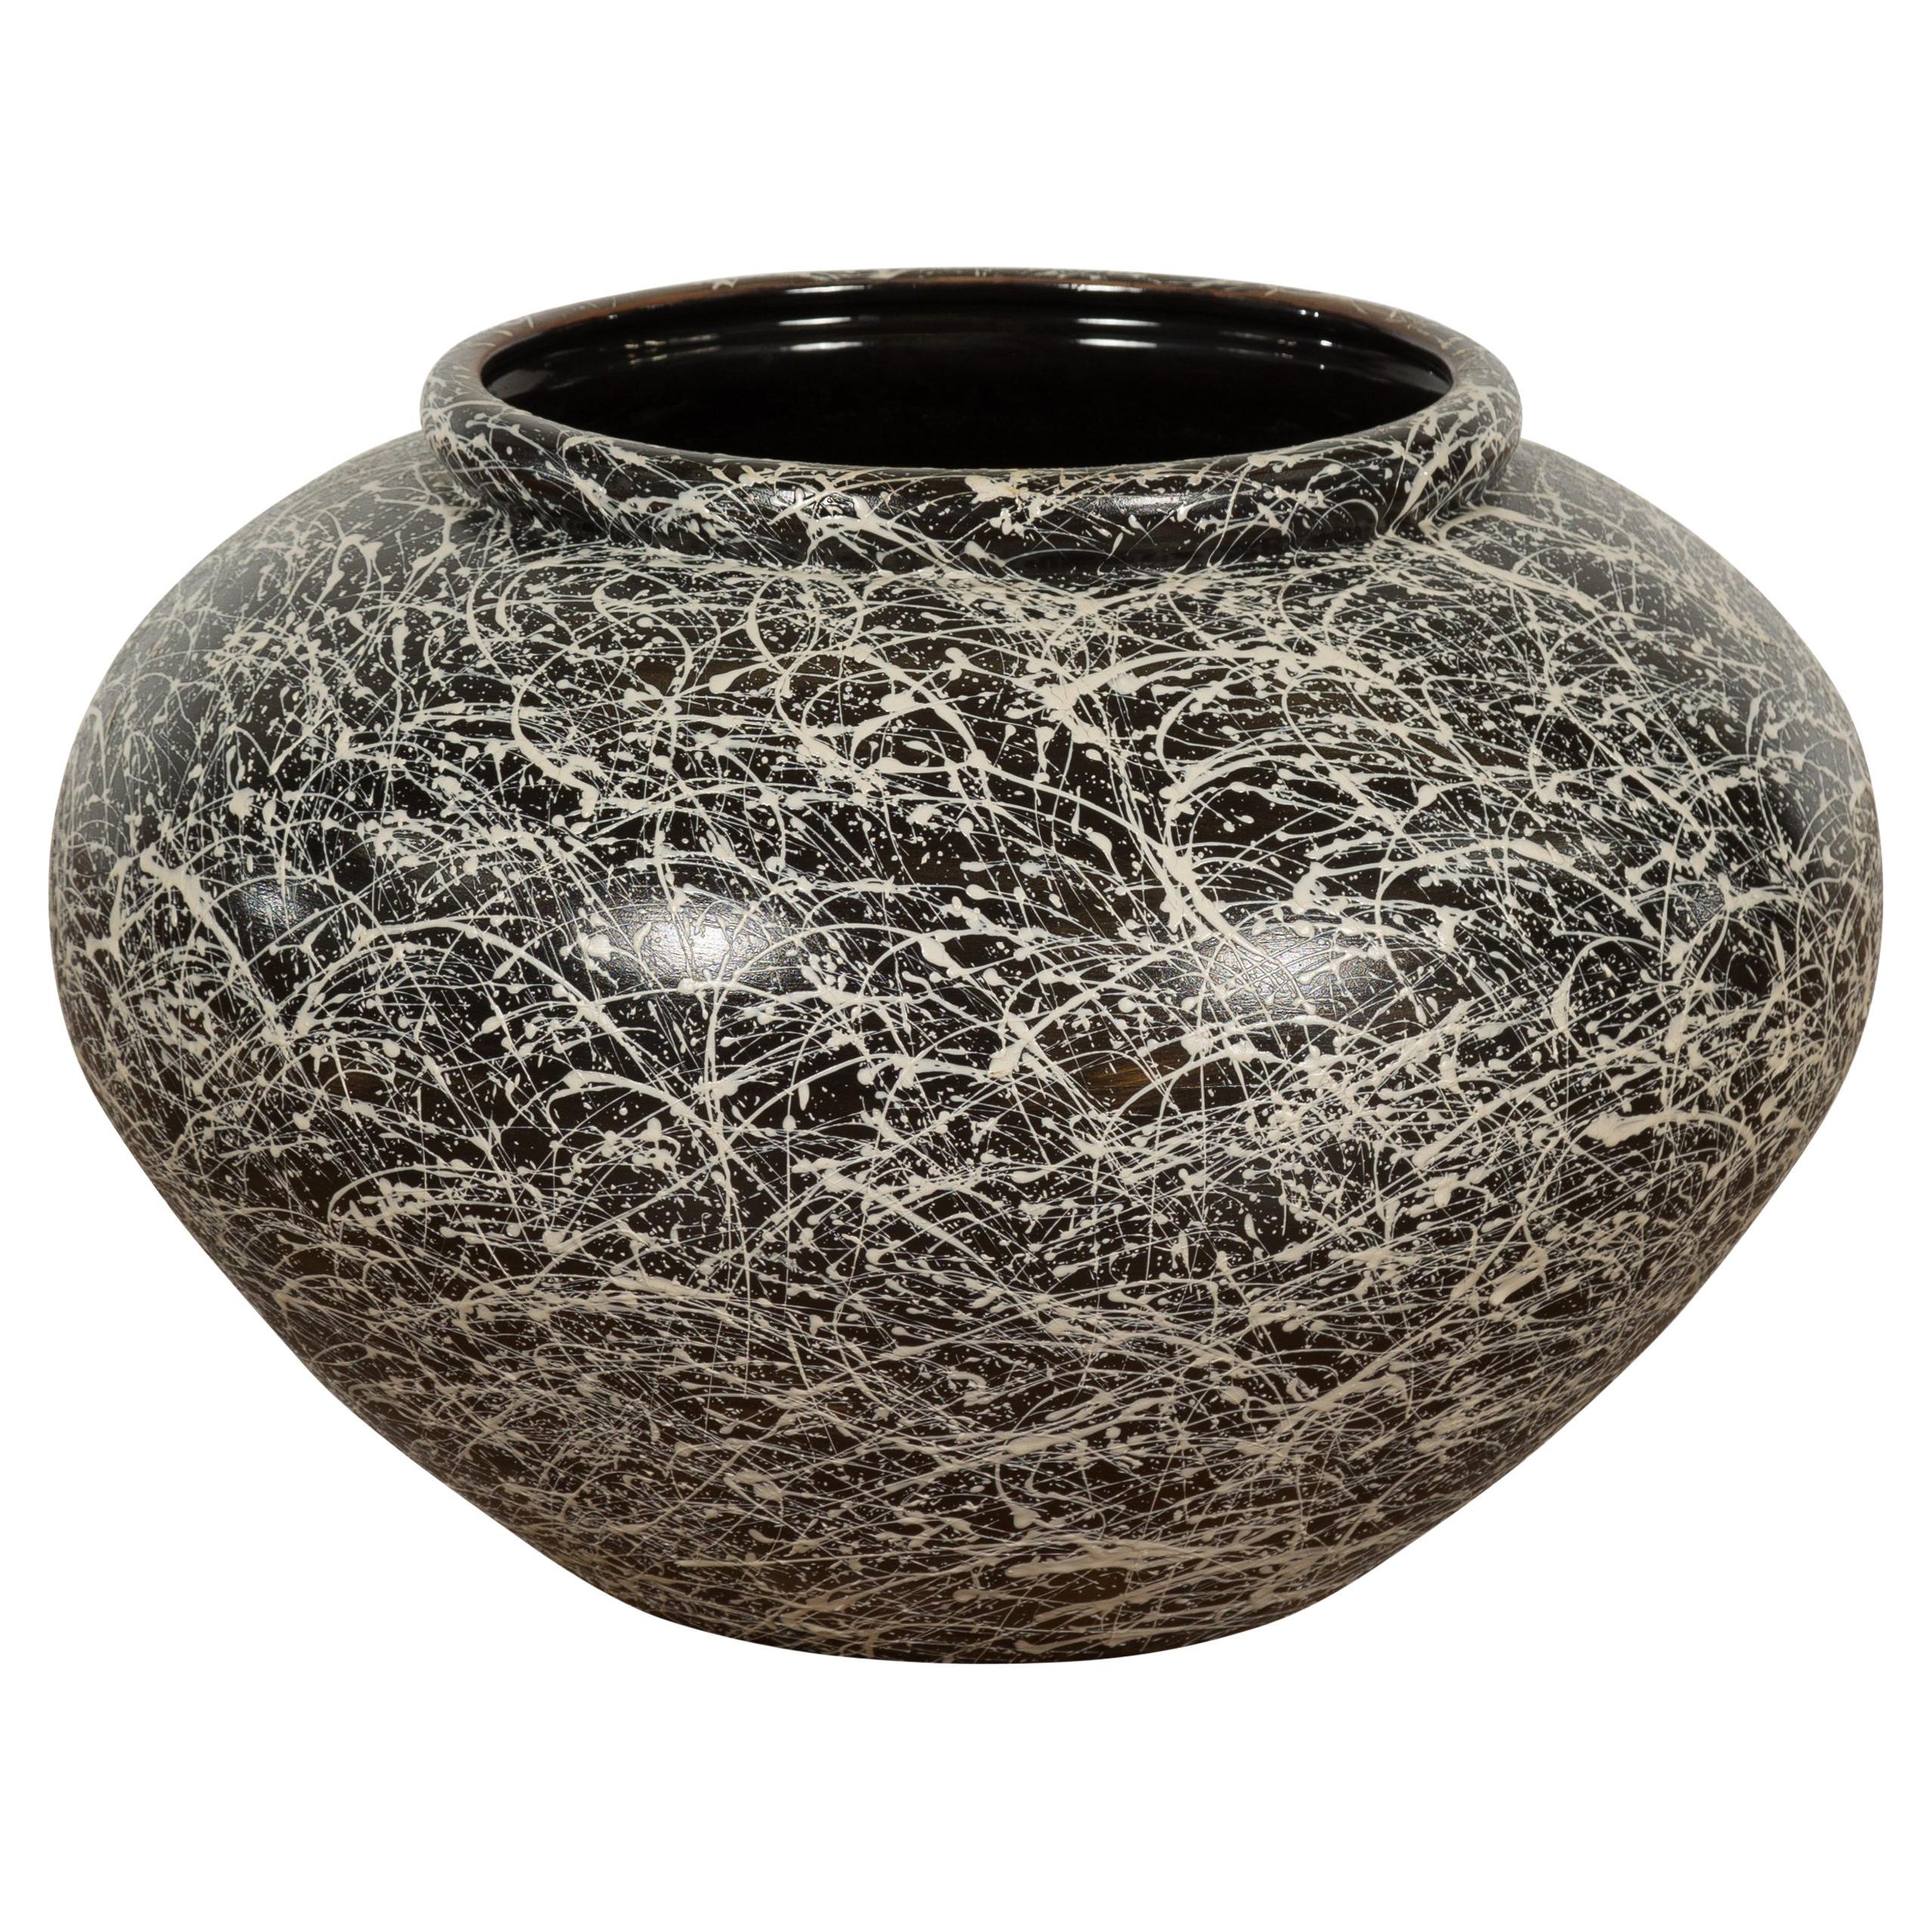 Prem Collection Artisan Made Black and White Planter with Dripping Décor